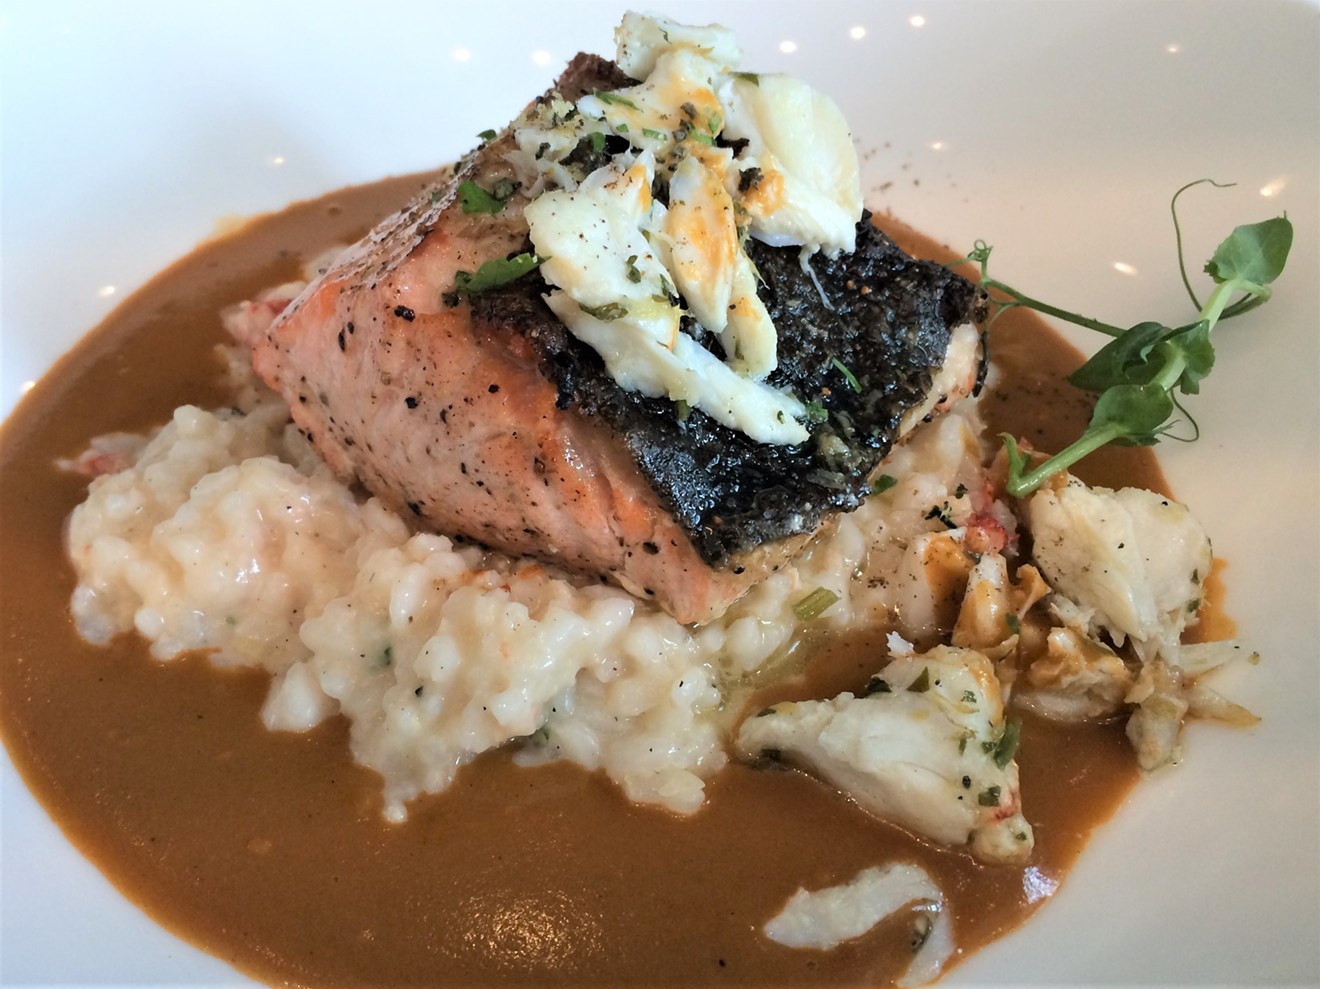 The salmon and risotto at Bistecca brings all the seafood to the bowl.